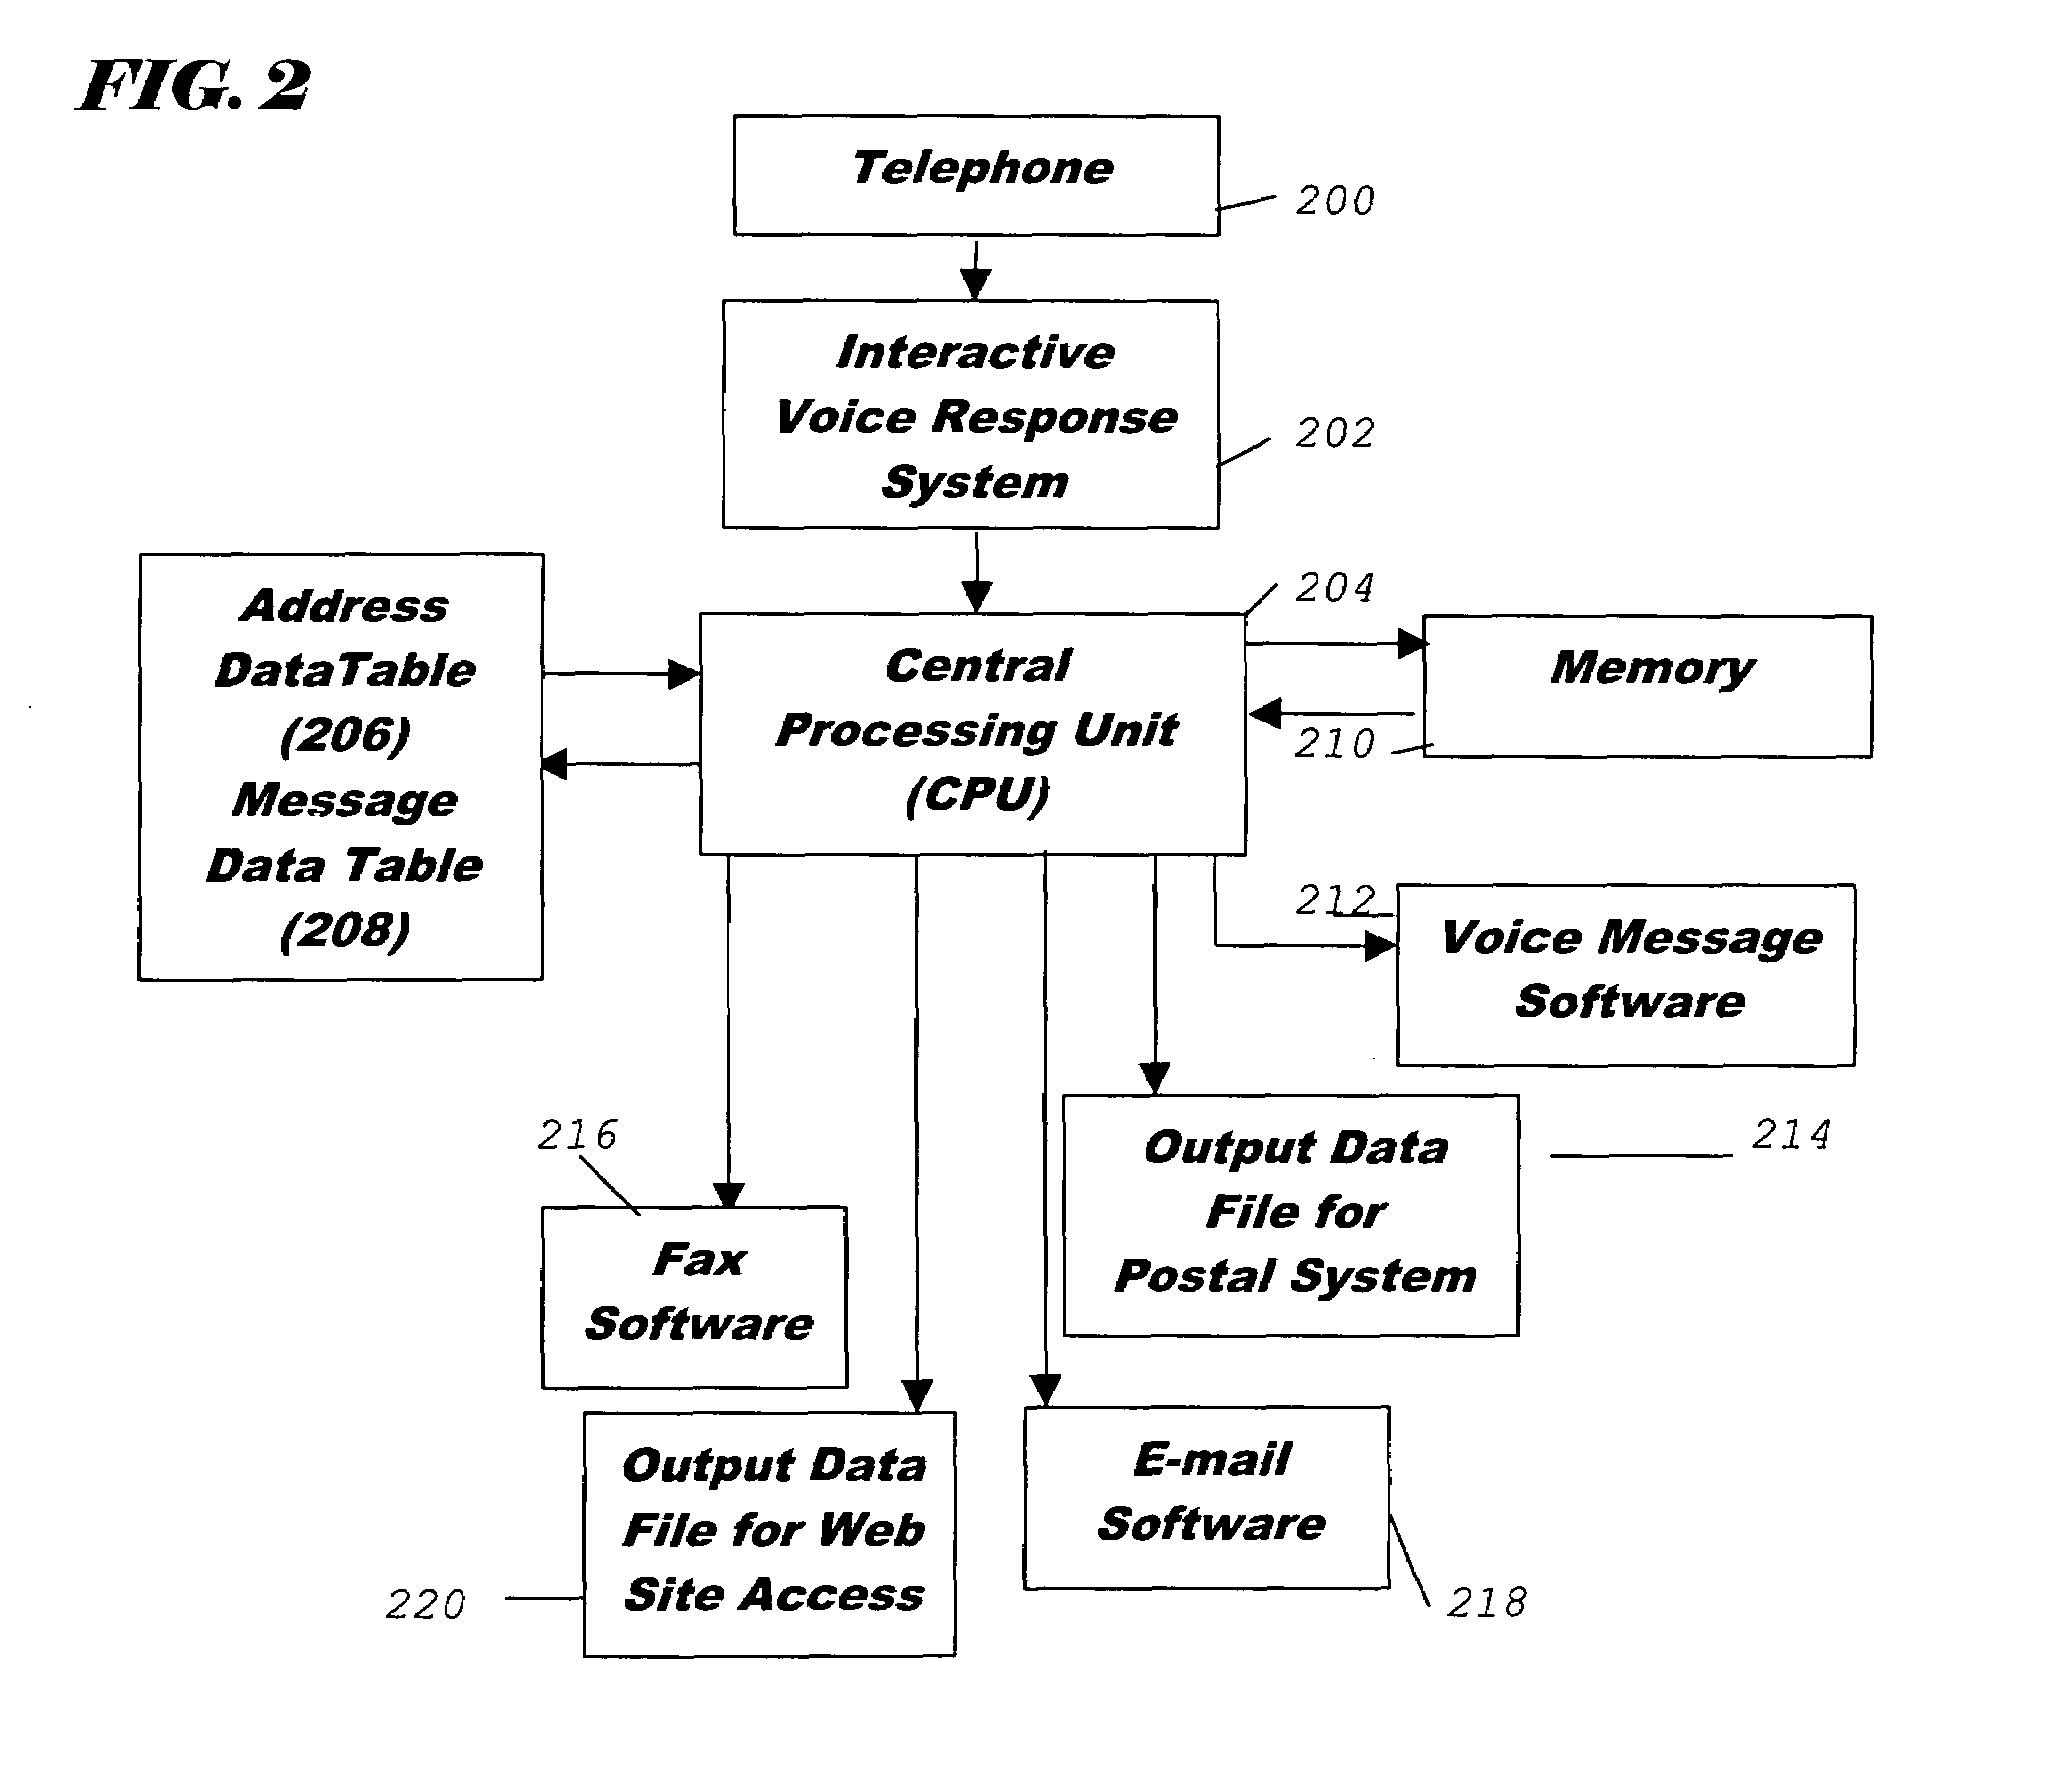 Method and system for telephonically selecting, addressing, and distributing messages